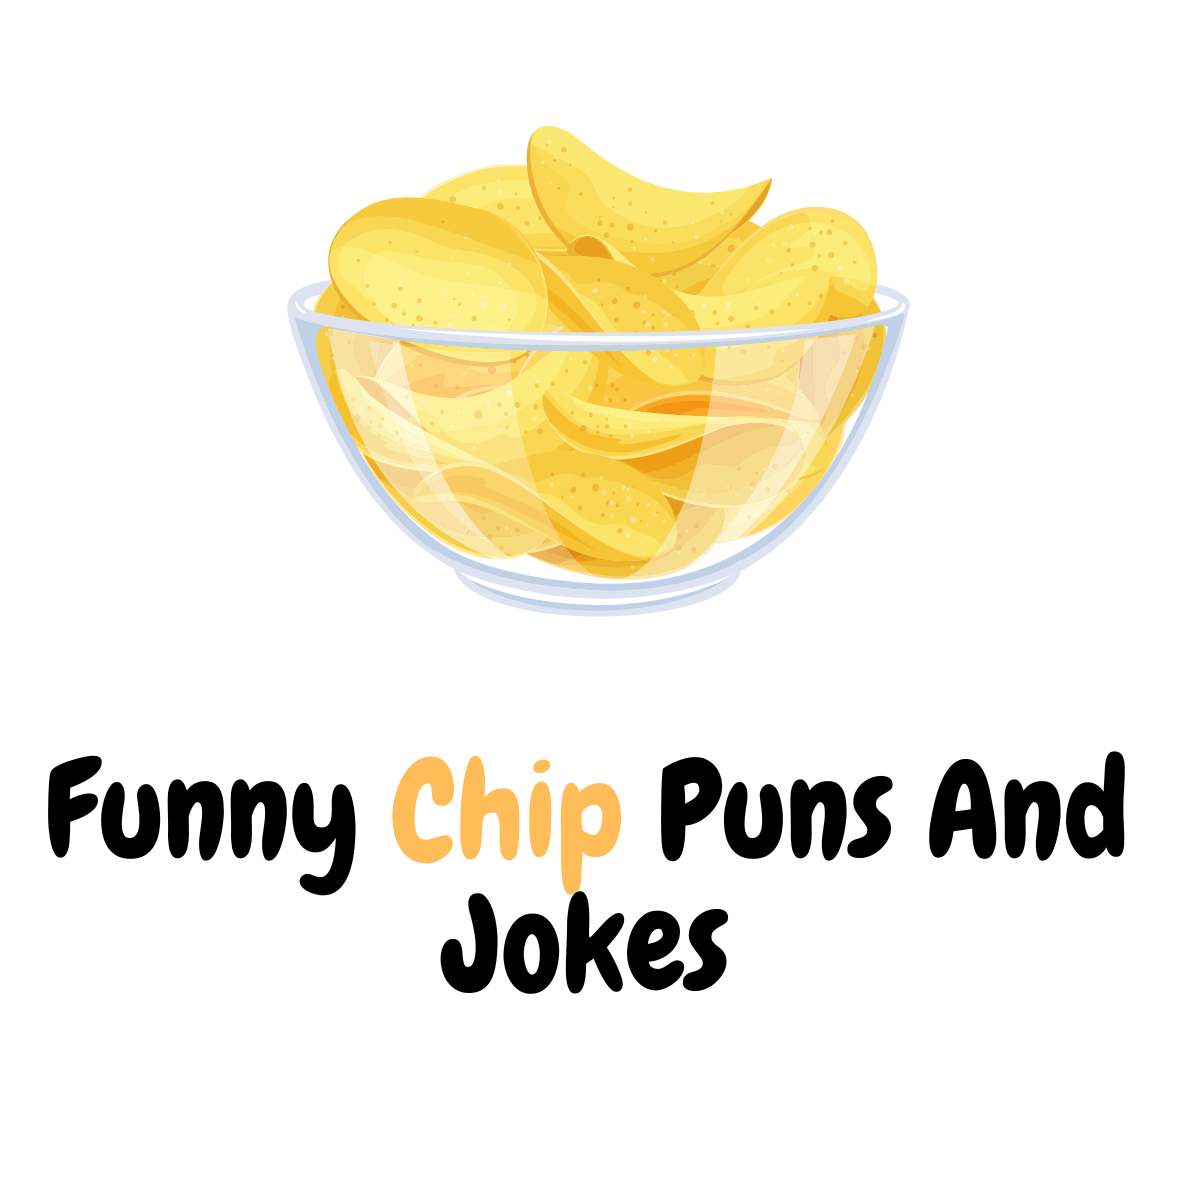 Funny Chip Puns And Jokes